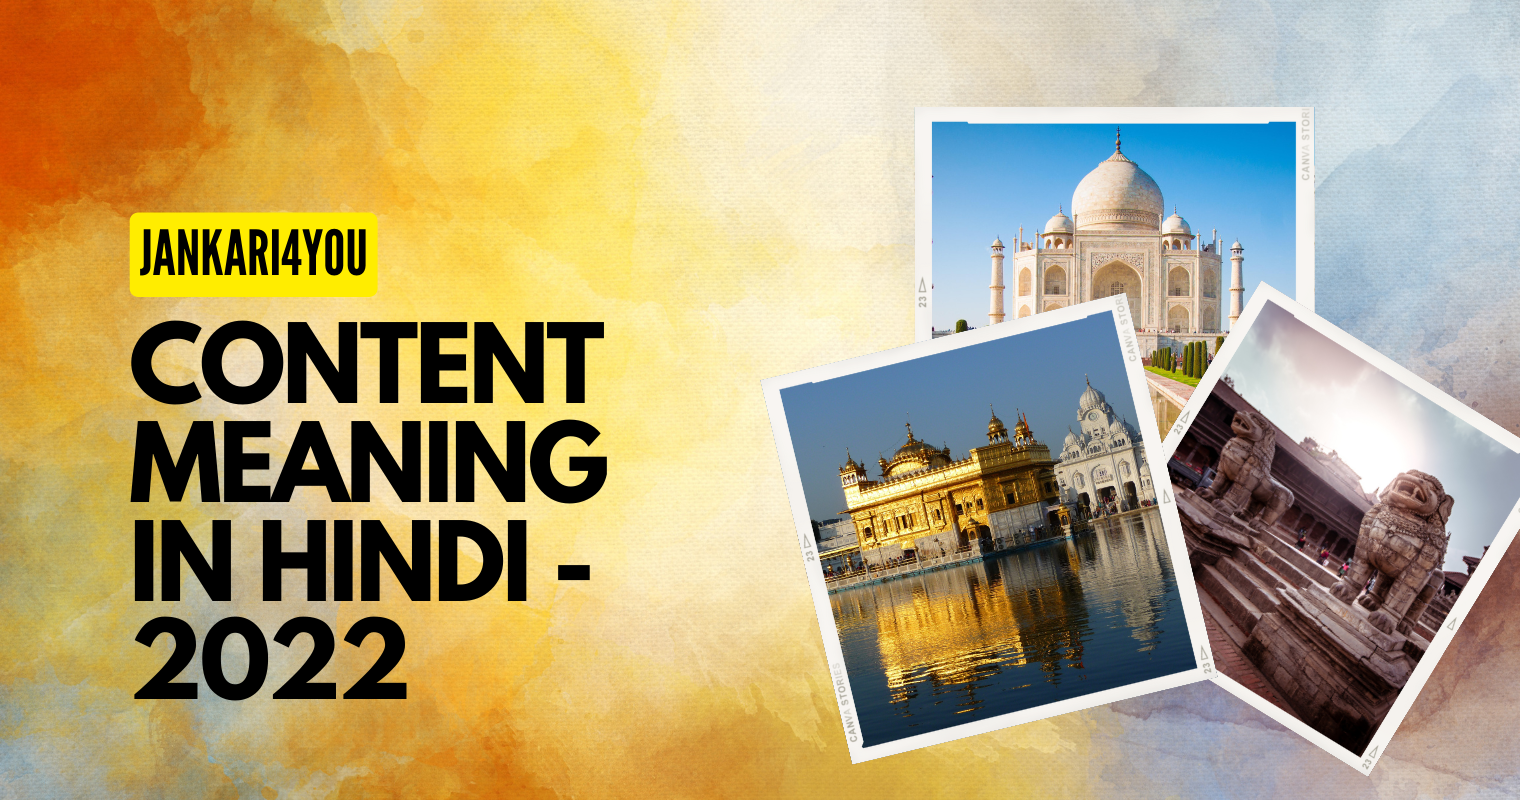 Content meaning in Hindi